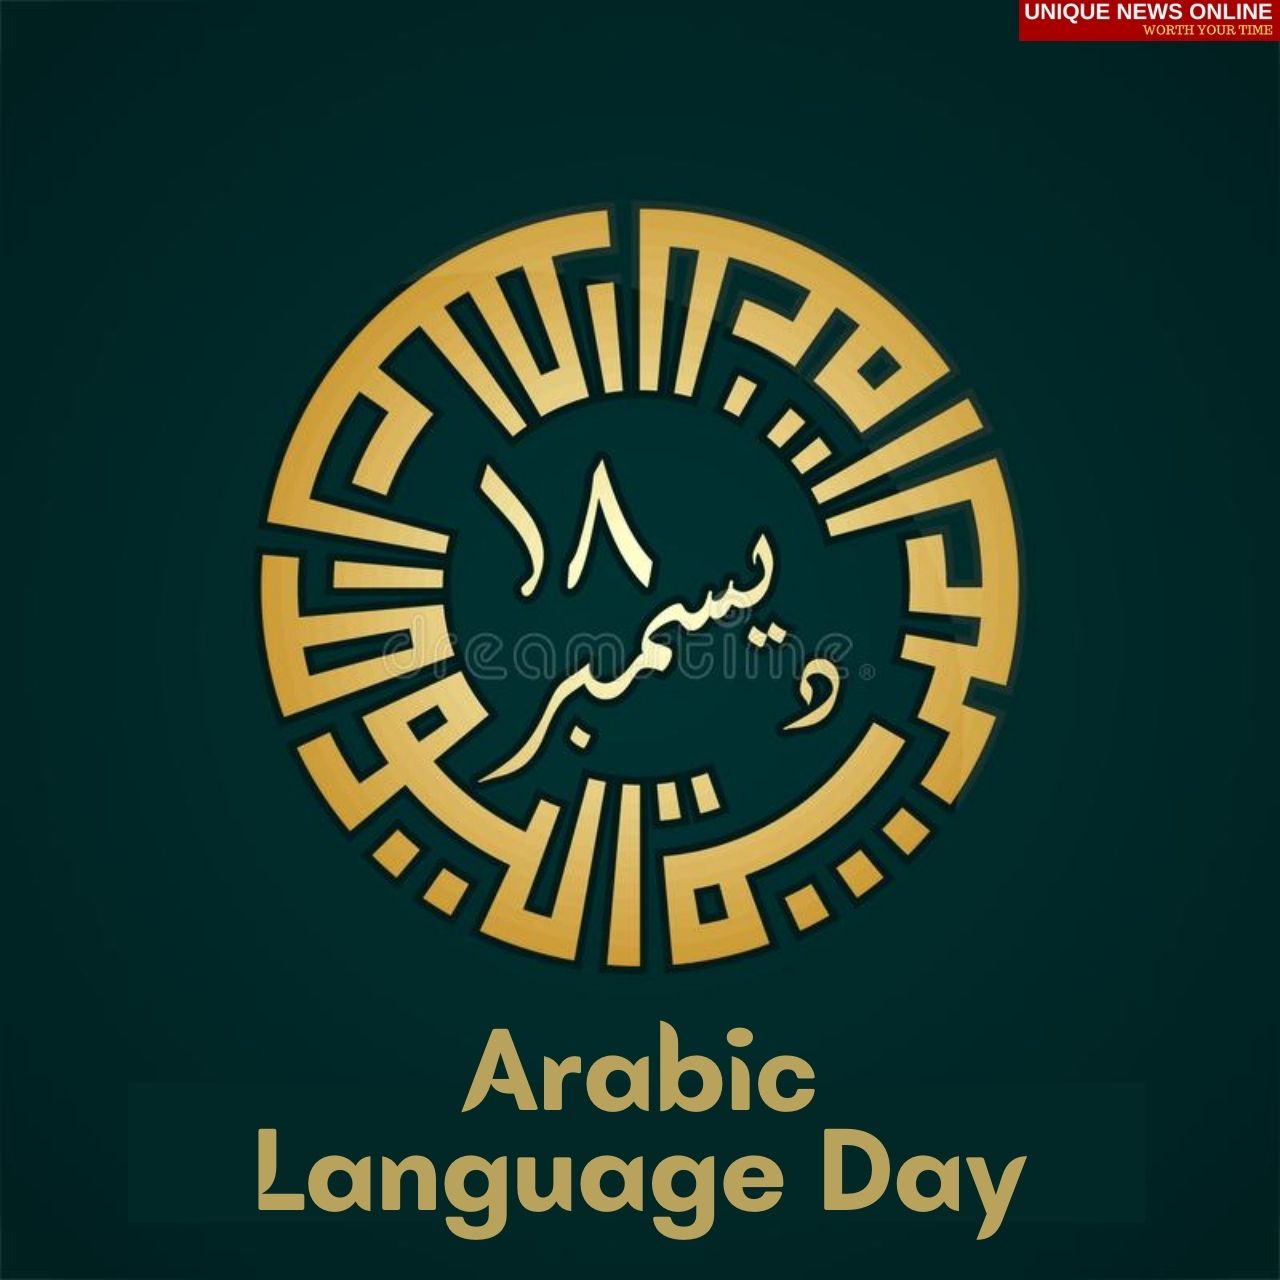 Arabic Language Day 2021 Date, History, Significance, Importance, Activities, and More